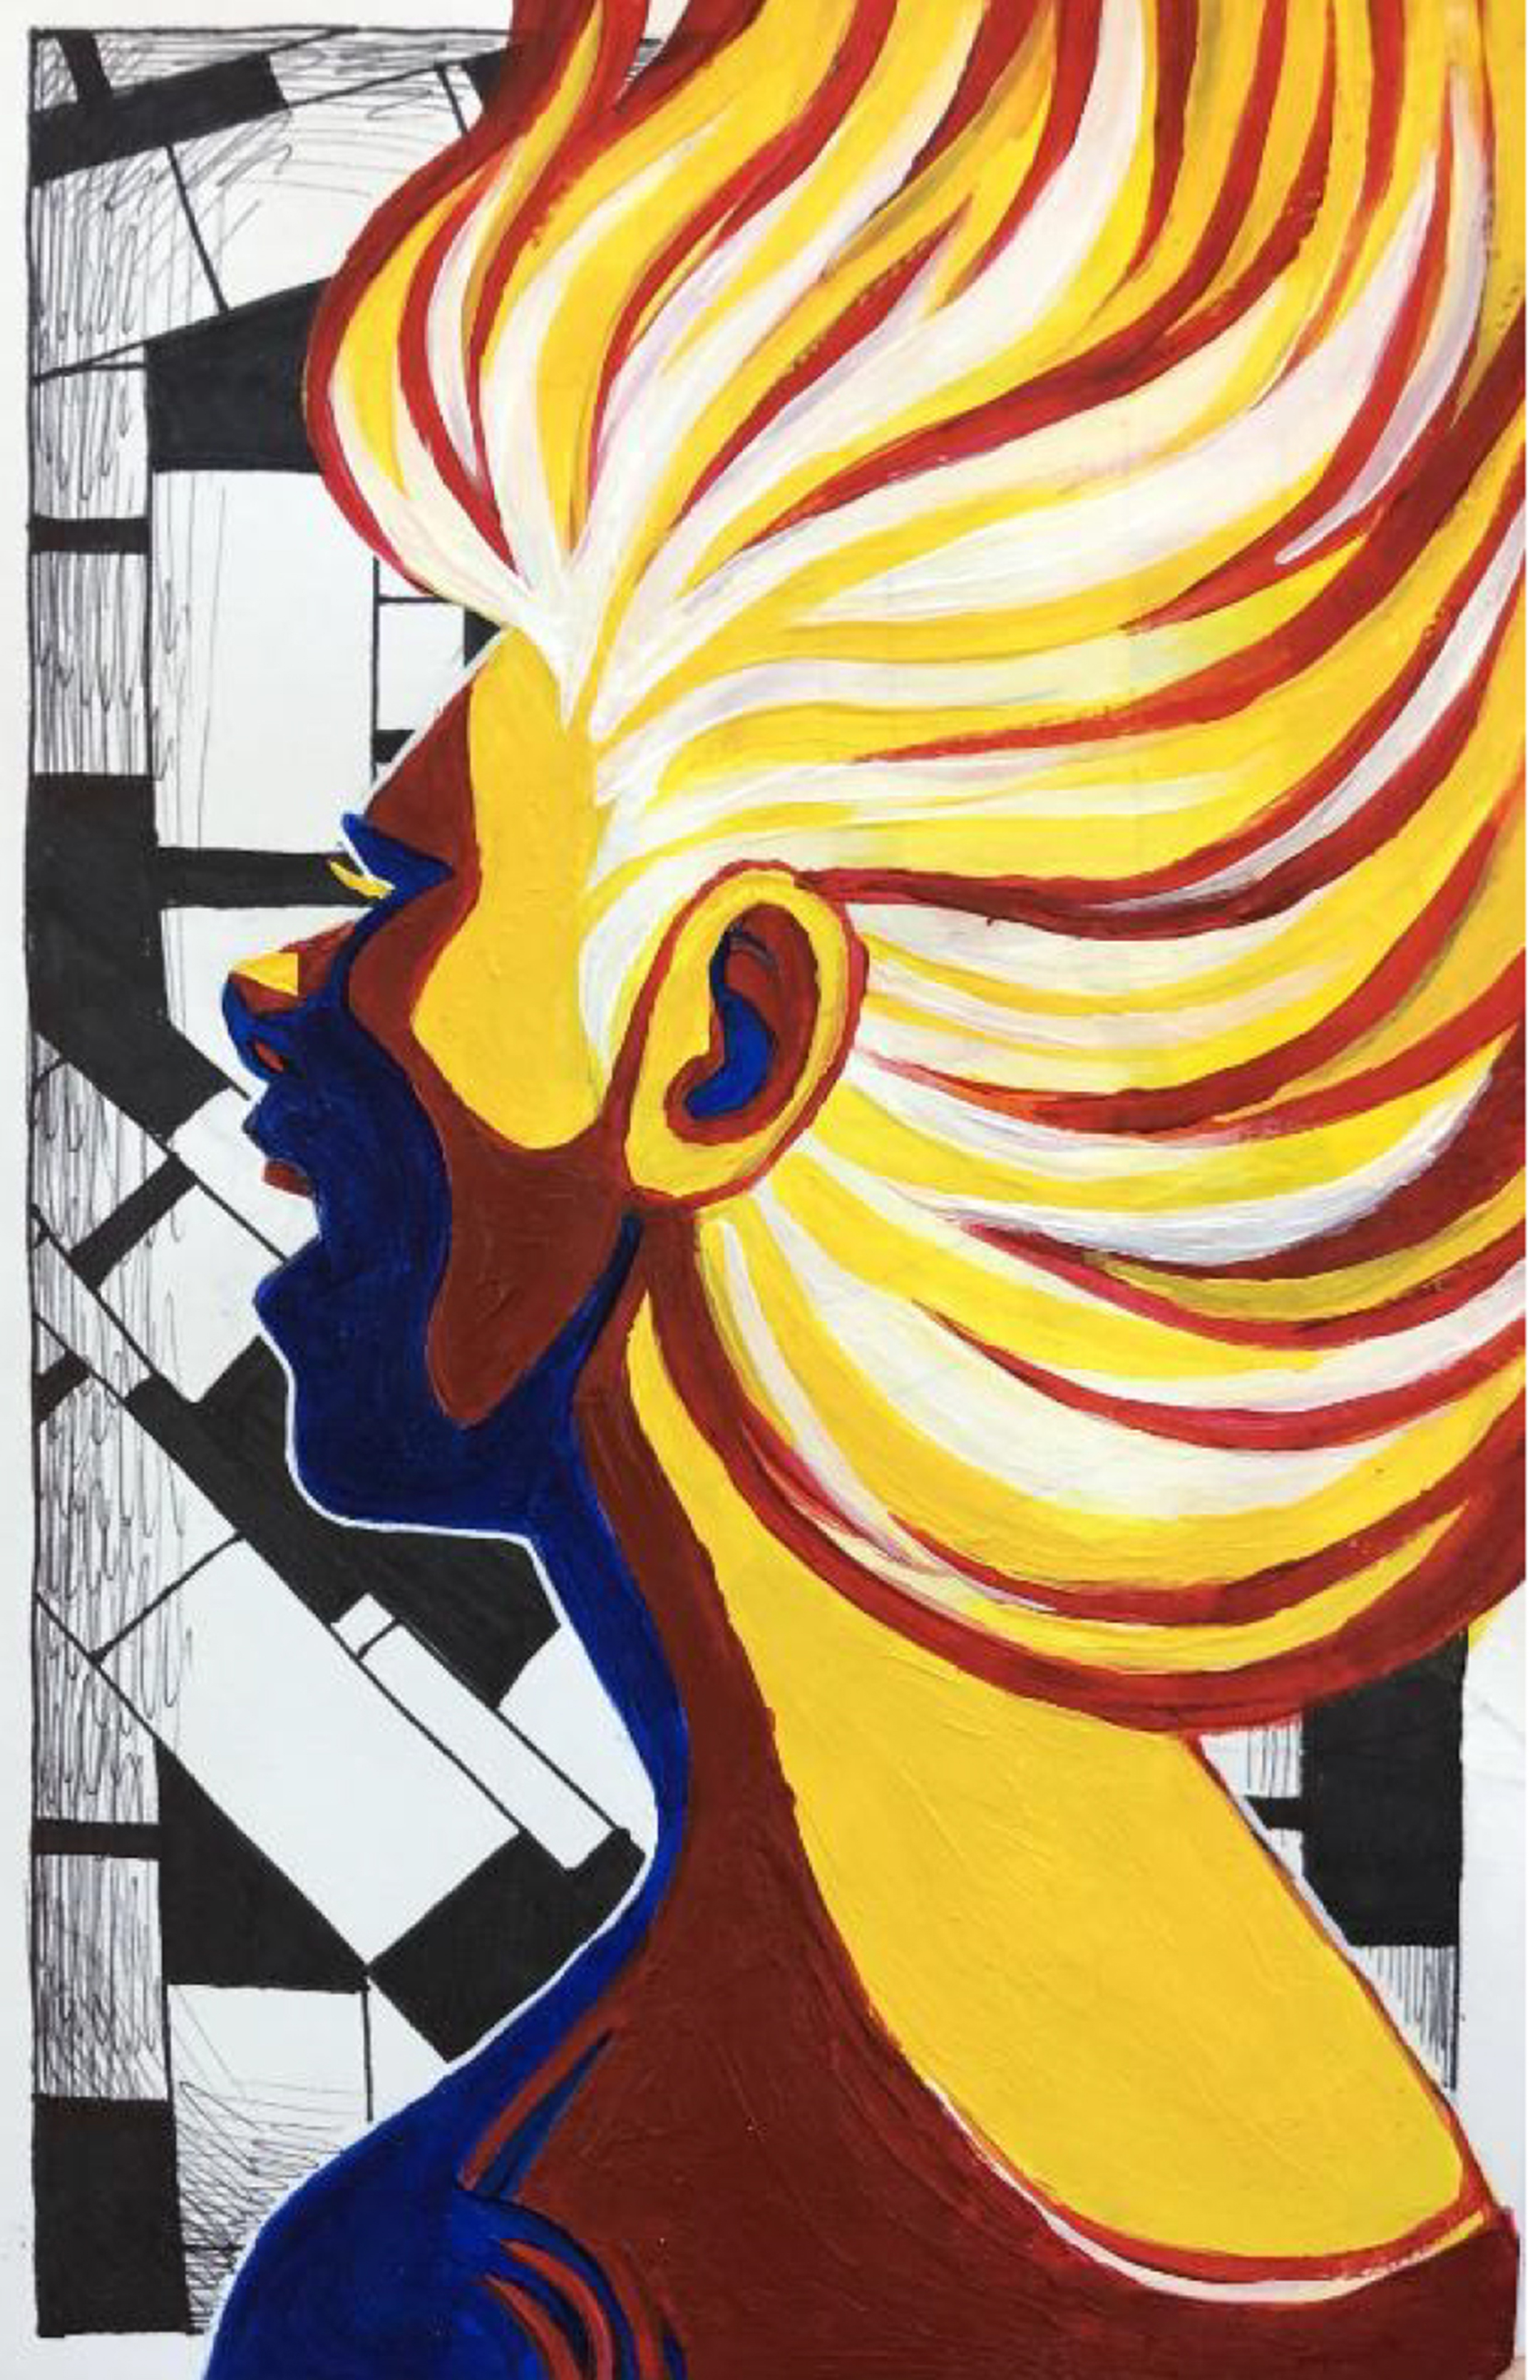 Painting of a woman from the shoulders up, looking to the left, in yellows and red against a black and white blocky background